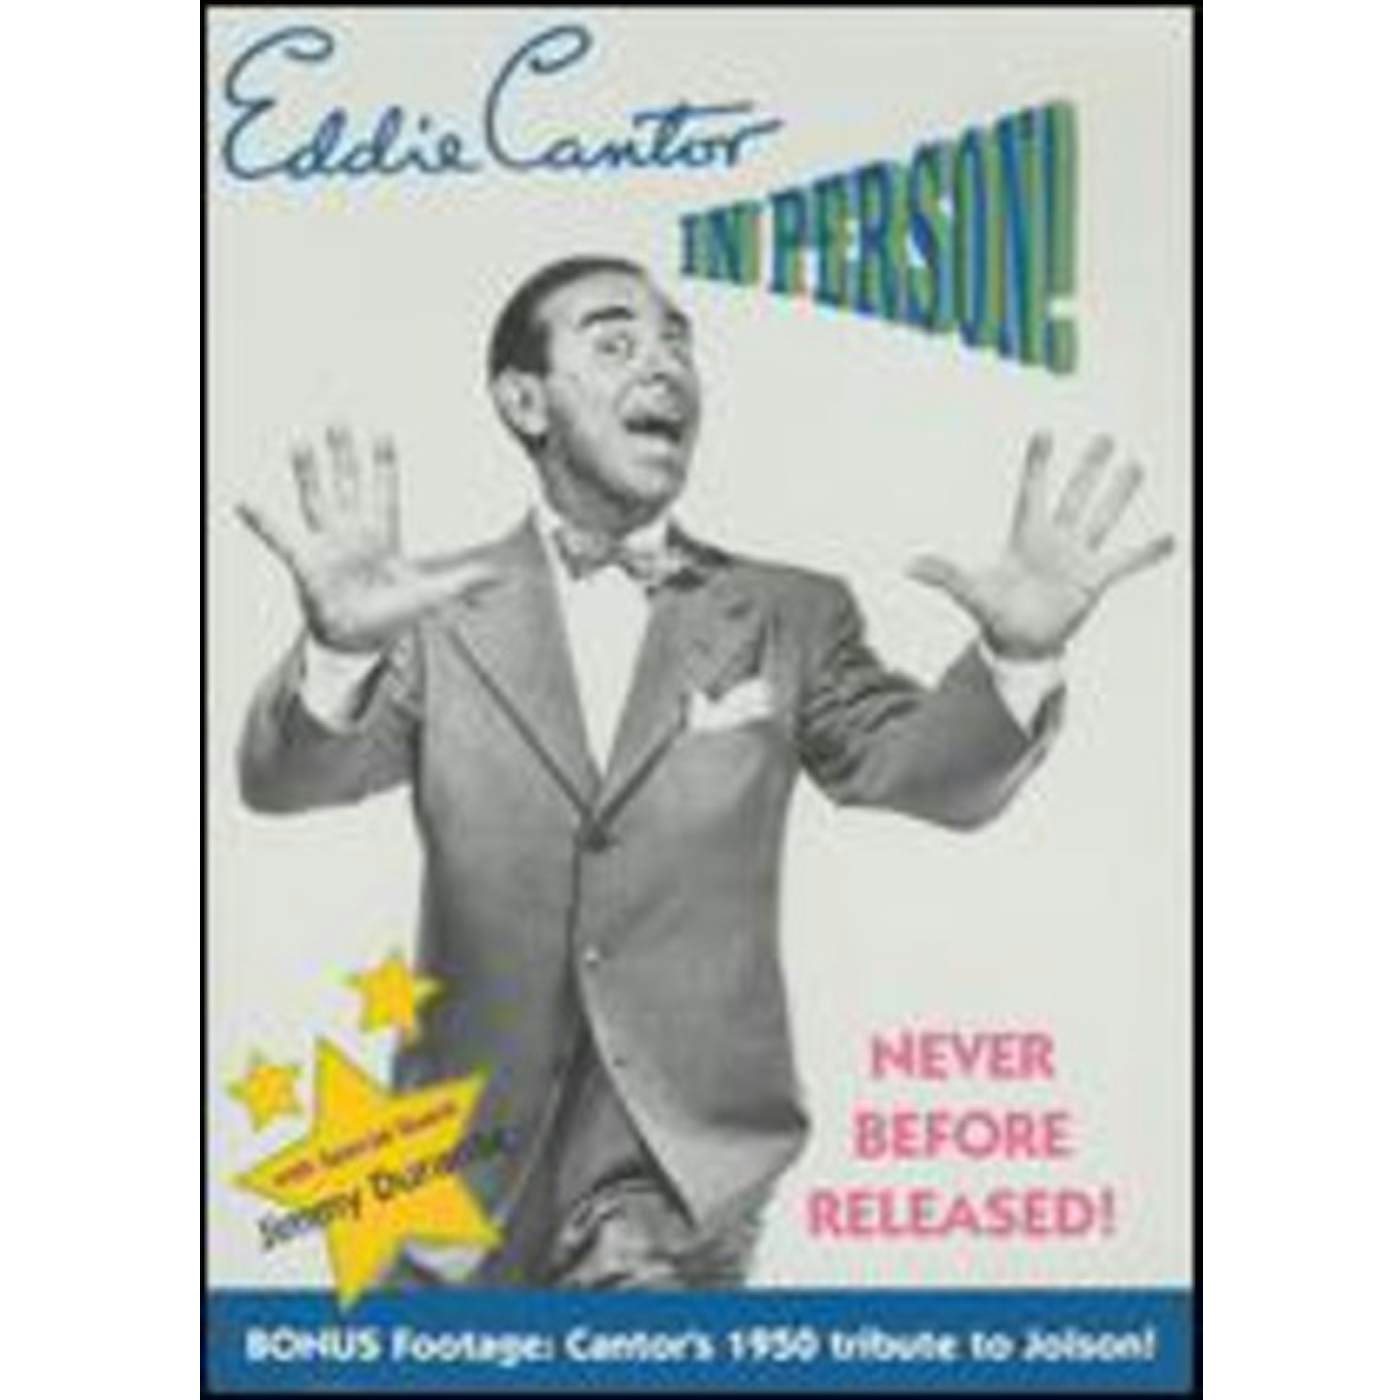 Eddie Cantor IN PERSON DVD